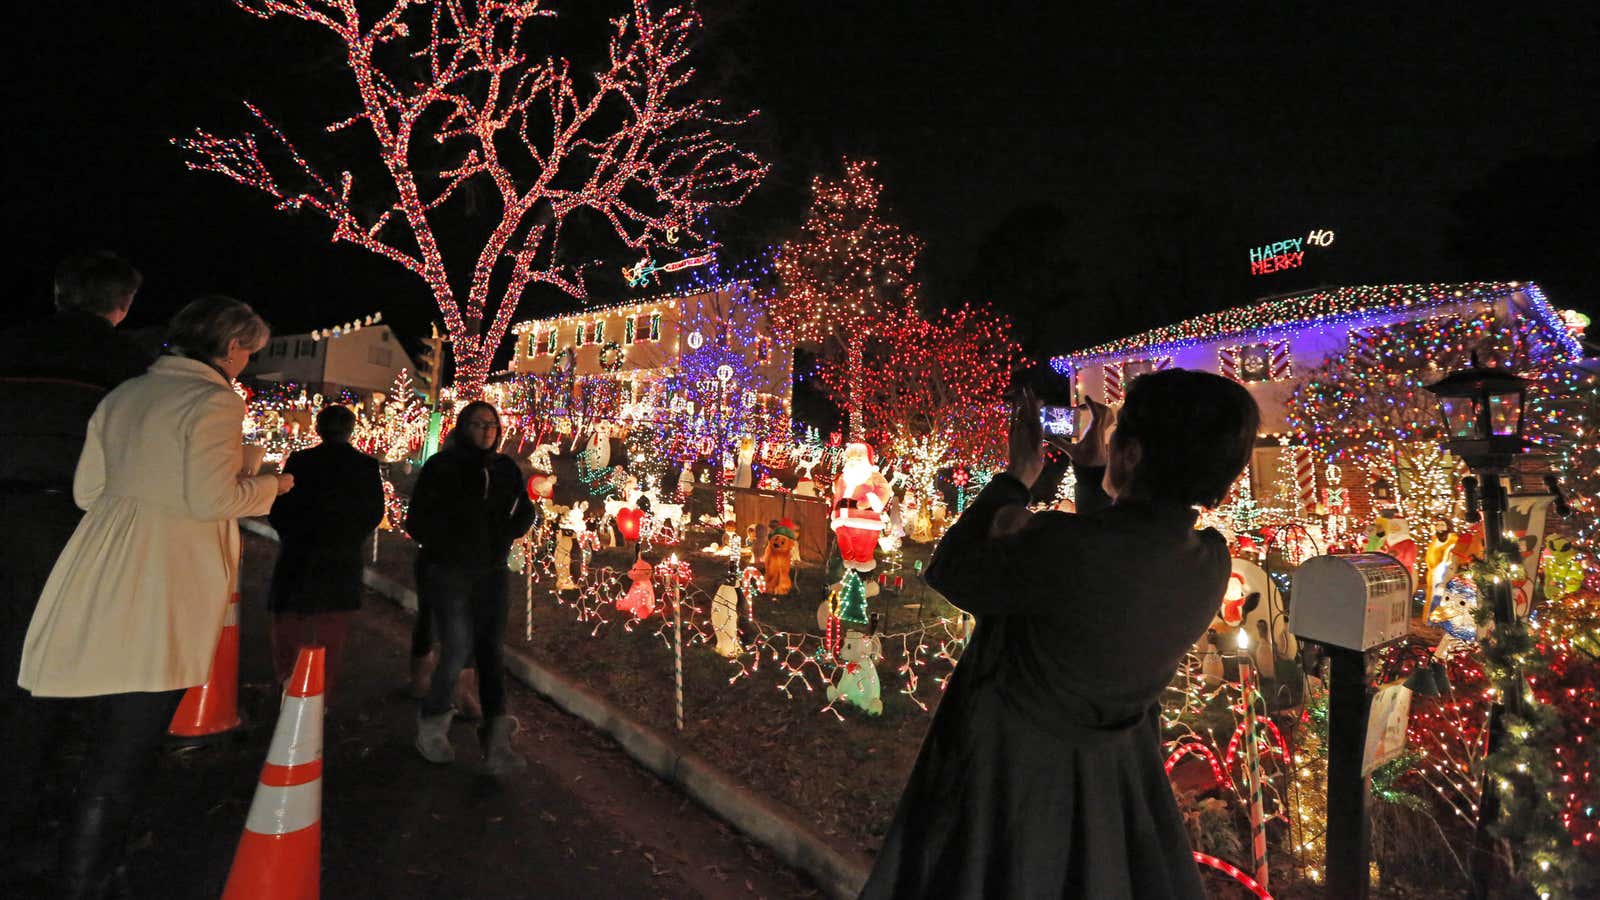 Extreme Christmas light displays draw crowds. Thanks to the internet of things, they don’t have to be expensive, tangled messes any more.